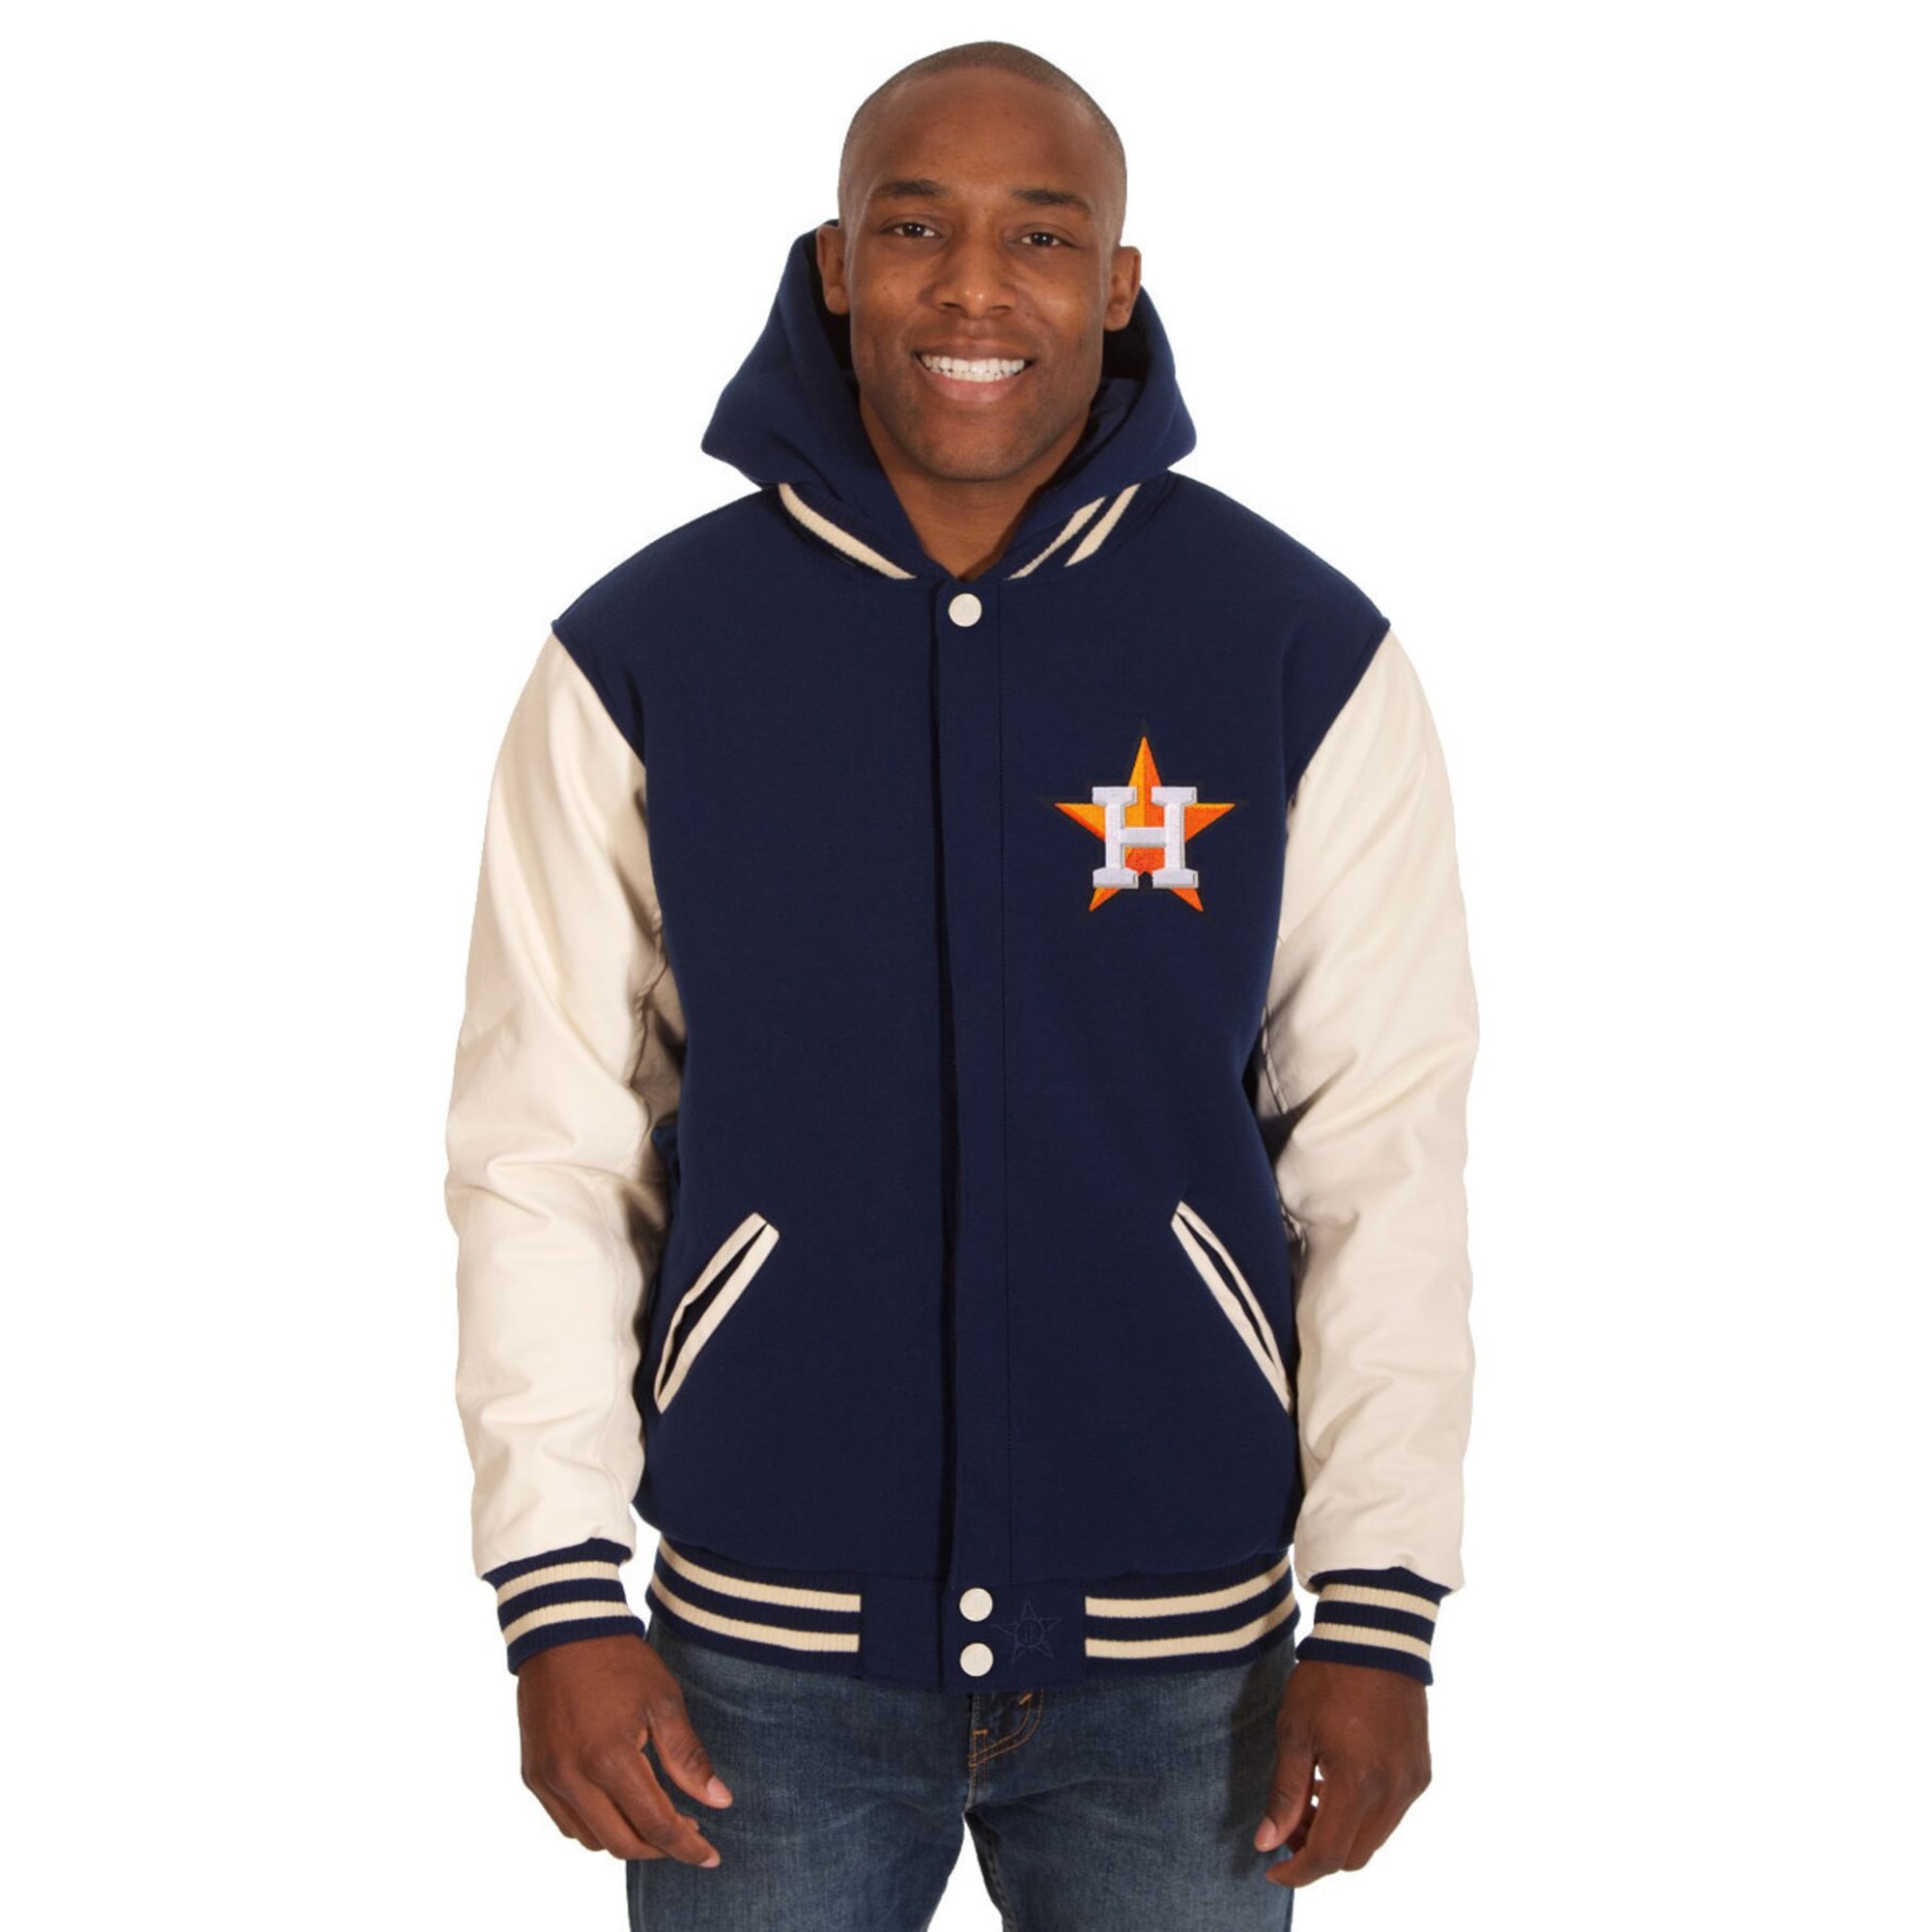 Houston Astros - JH Design Reversible Fleece Jacket with Faux Leather Sleeves - Navy/White 4X-Large